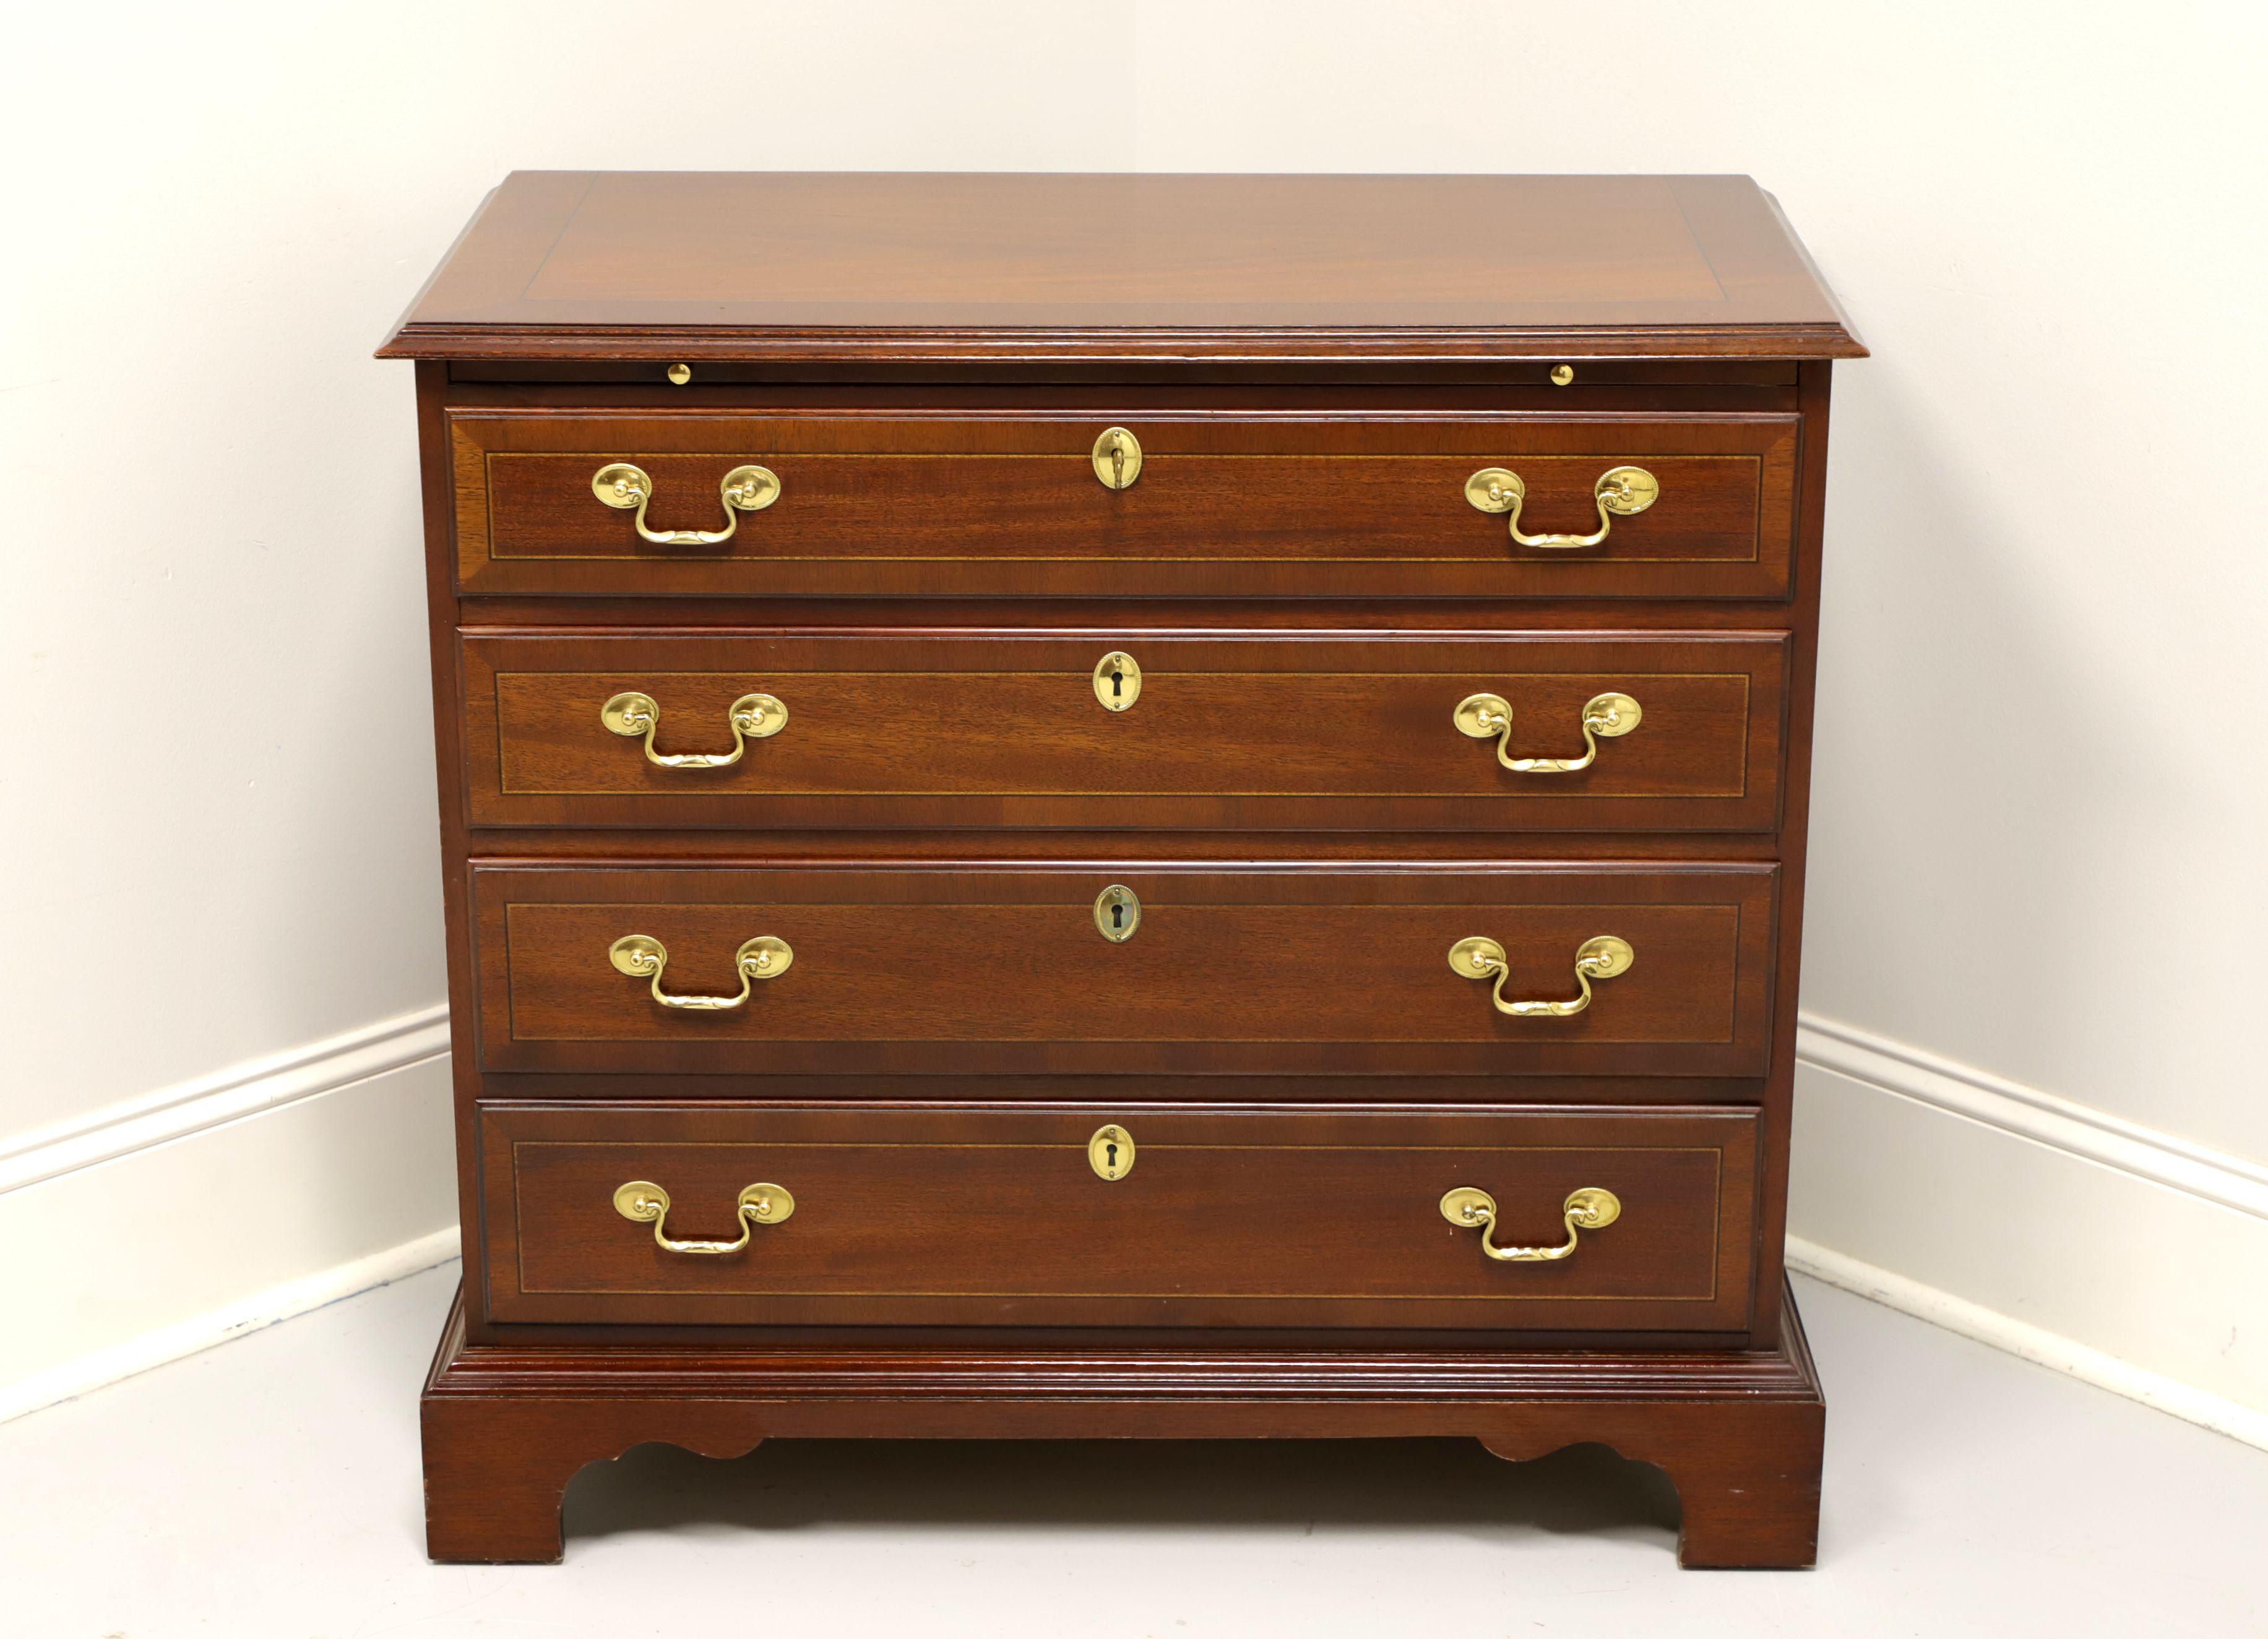 A Chippendale style bachelor chest by Councill Craftsmen. Mahogany with banded mahogany top & drawer fronts, brass hardware and bracket feet. Features a brushing slide and four drawers of dovetail construction, top drawer being lockable. Includes